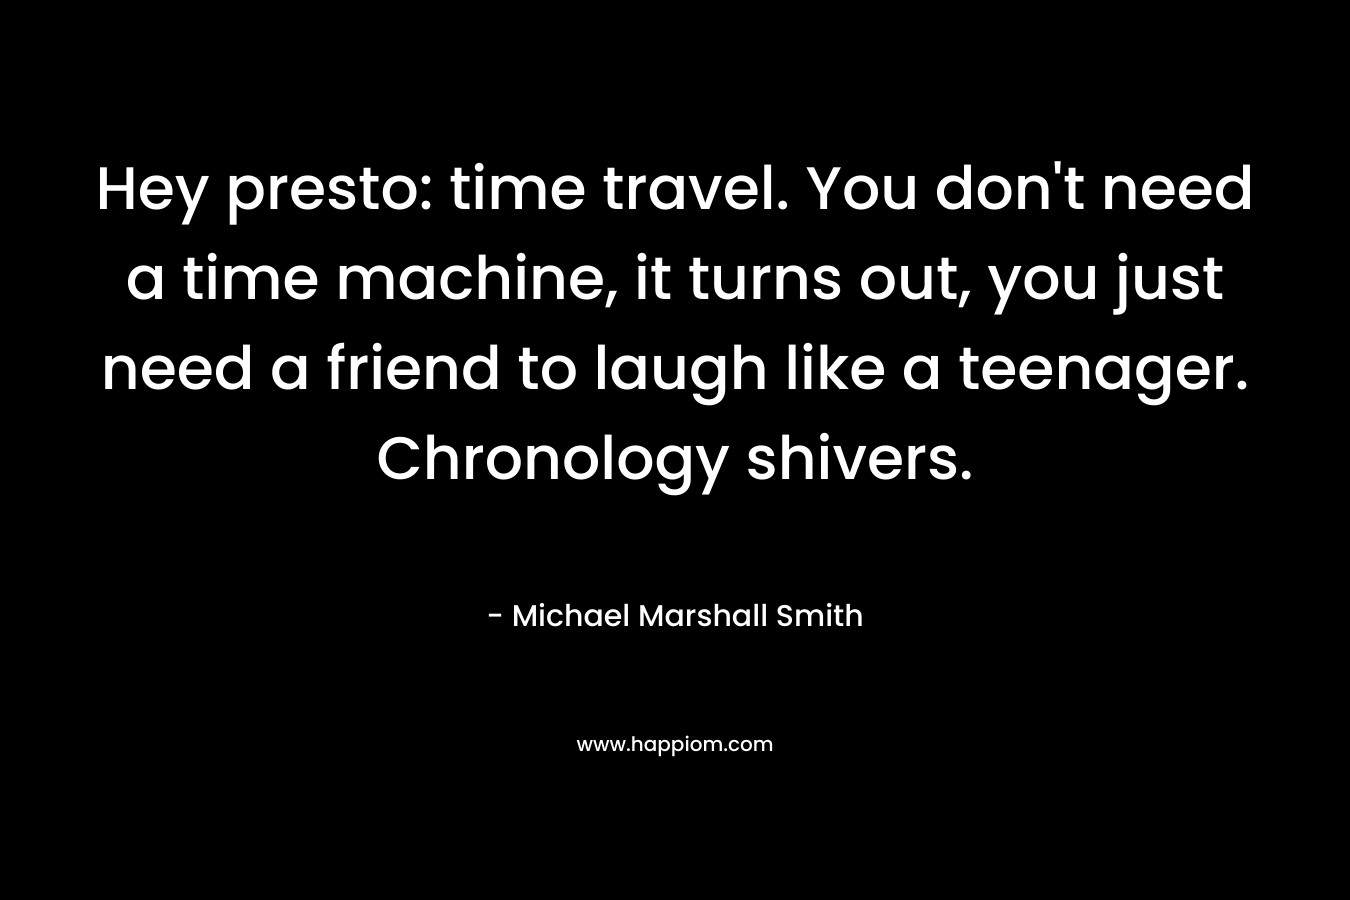 Hey presto: time travel. You don’t need a time machine, it turns out, you just need a friend to laugh like a teenager. Chronology shivers. – Michael Marshall Smith